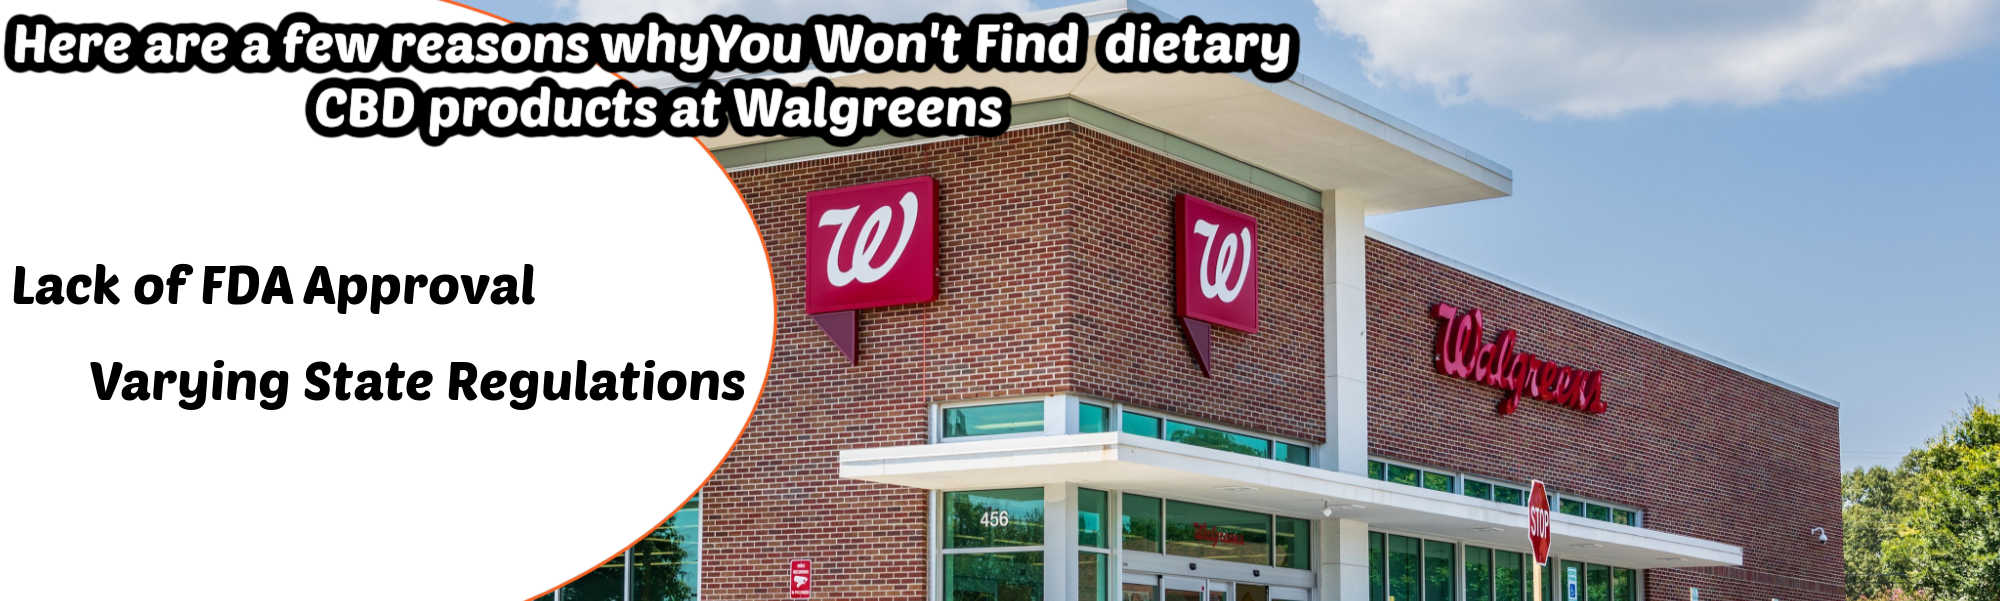 image of reasons why you wont find cbd products at walgreens